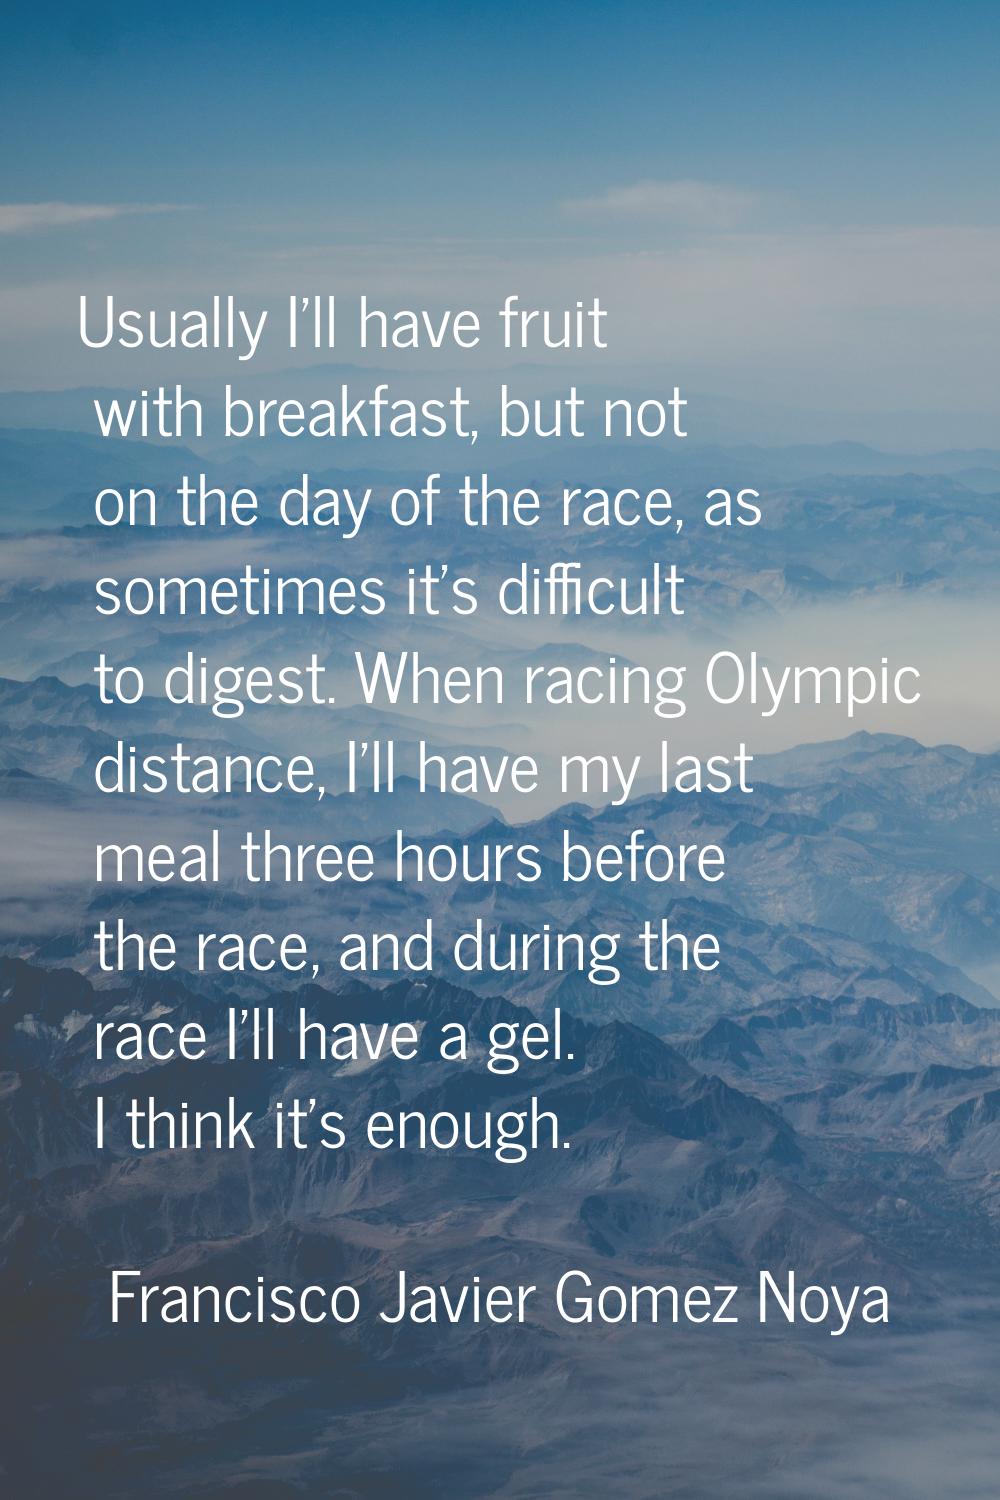 Usually I'll have fruit with breakfast, but not on the day of the race, as sometimes it's difficult